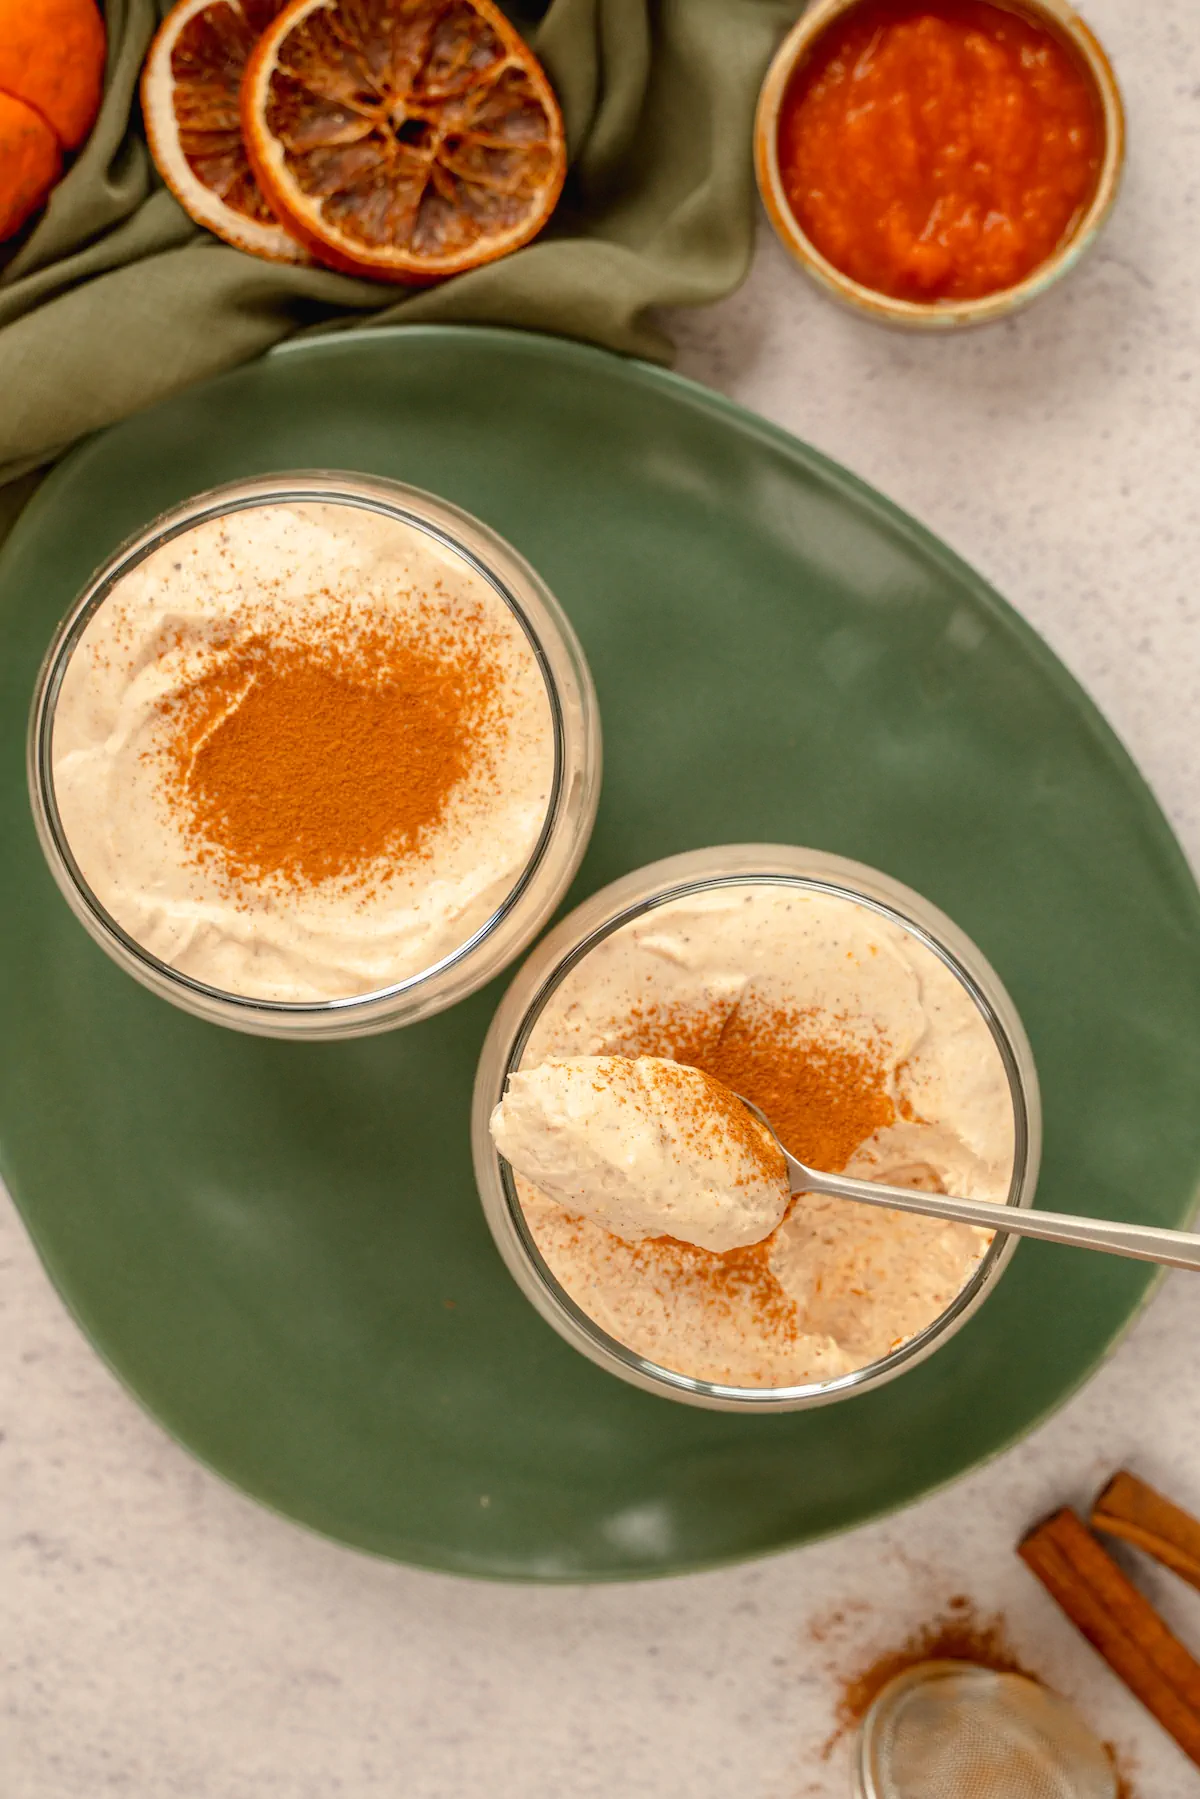 Keto pumpkin cheesecake mousse served in two transparent glasses garnished with cinnamon powder, where one glass remains untouched, while some portions is eaten from the other glass and a spoonful is ready to be eaten too.